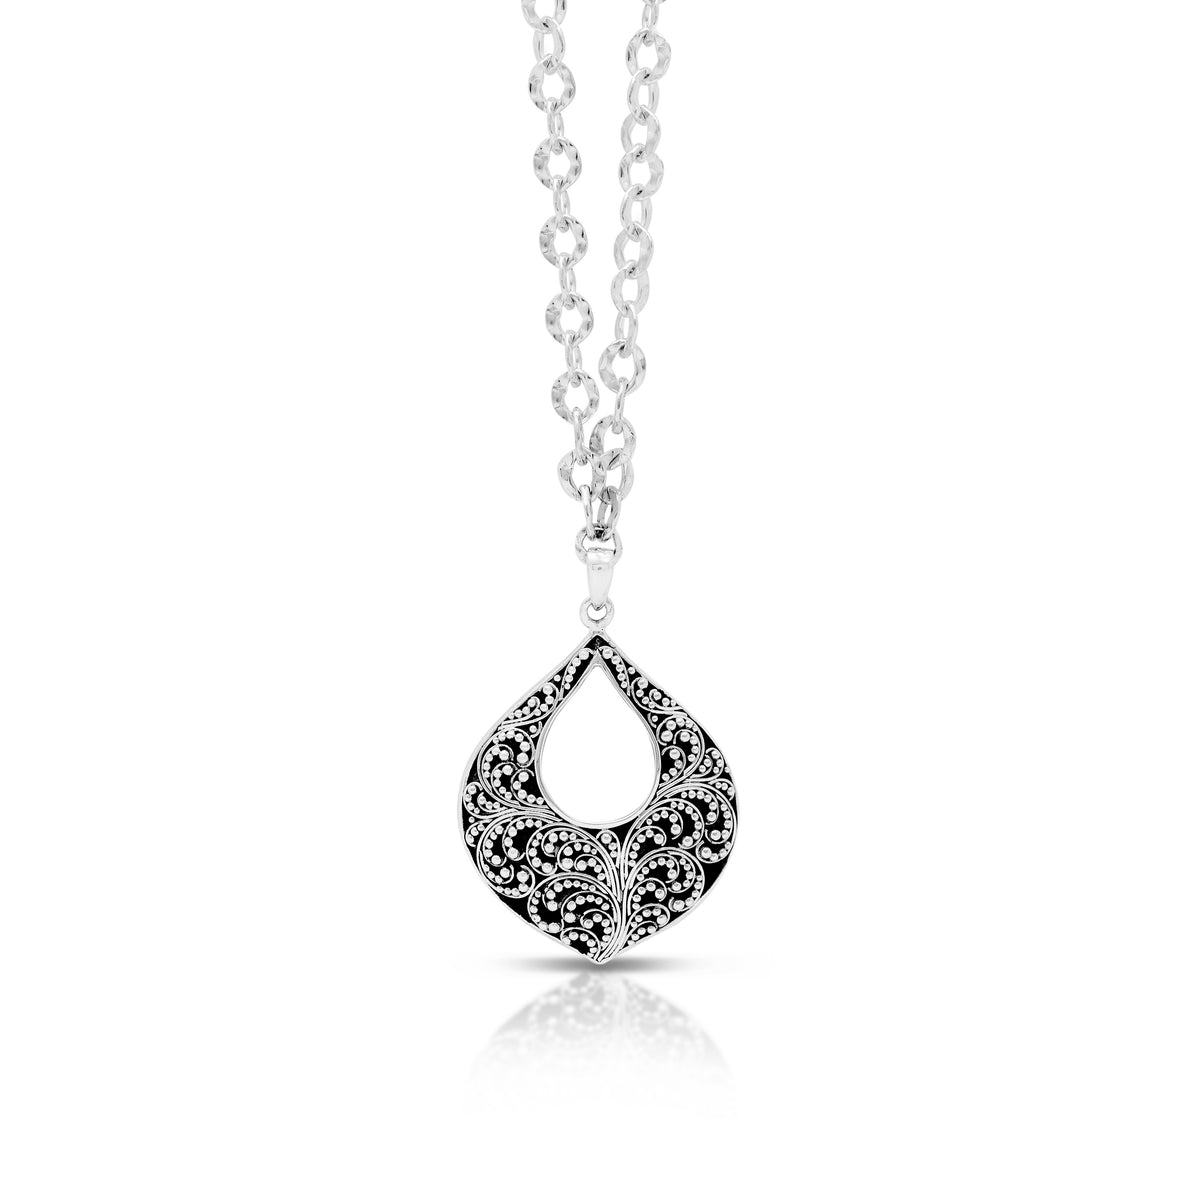 Open Classic Granulated Pendant Necklace. Pendant 32mm x 48mm on 18" chain